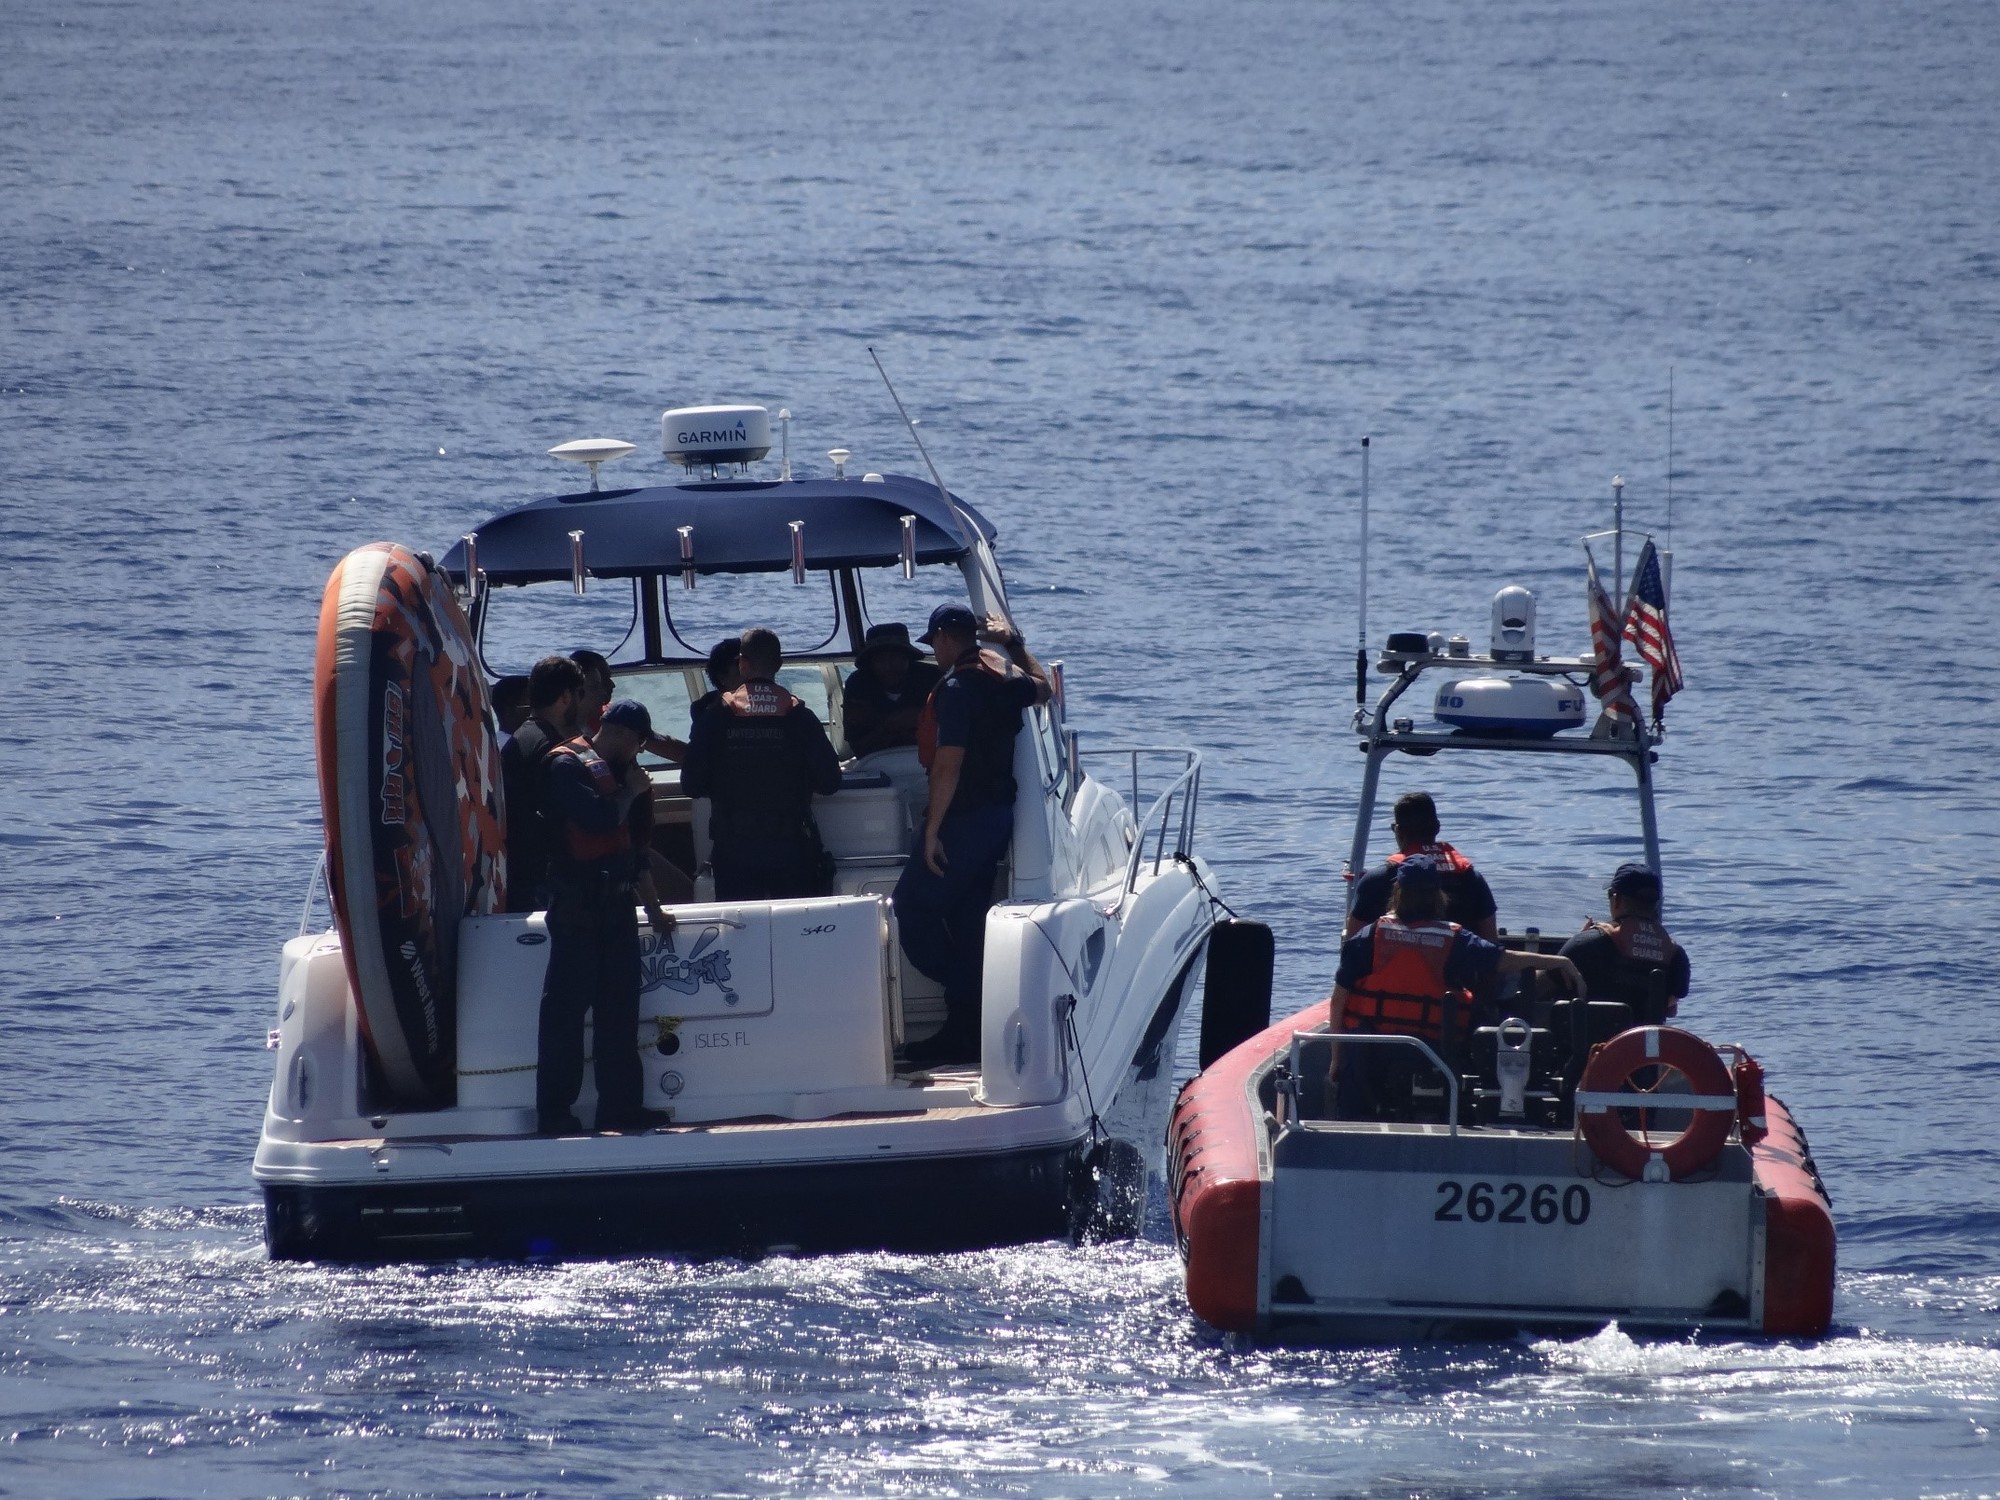 Coast Guard interdicts 4 migrants, 2 suspected smugglers 30 miles east of Hollywood